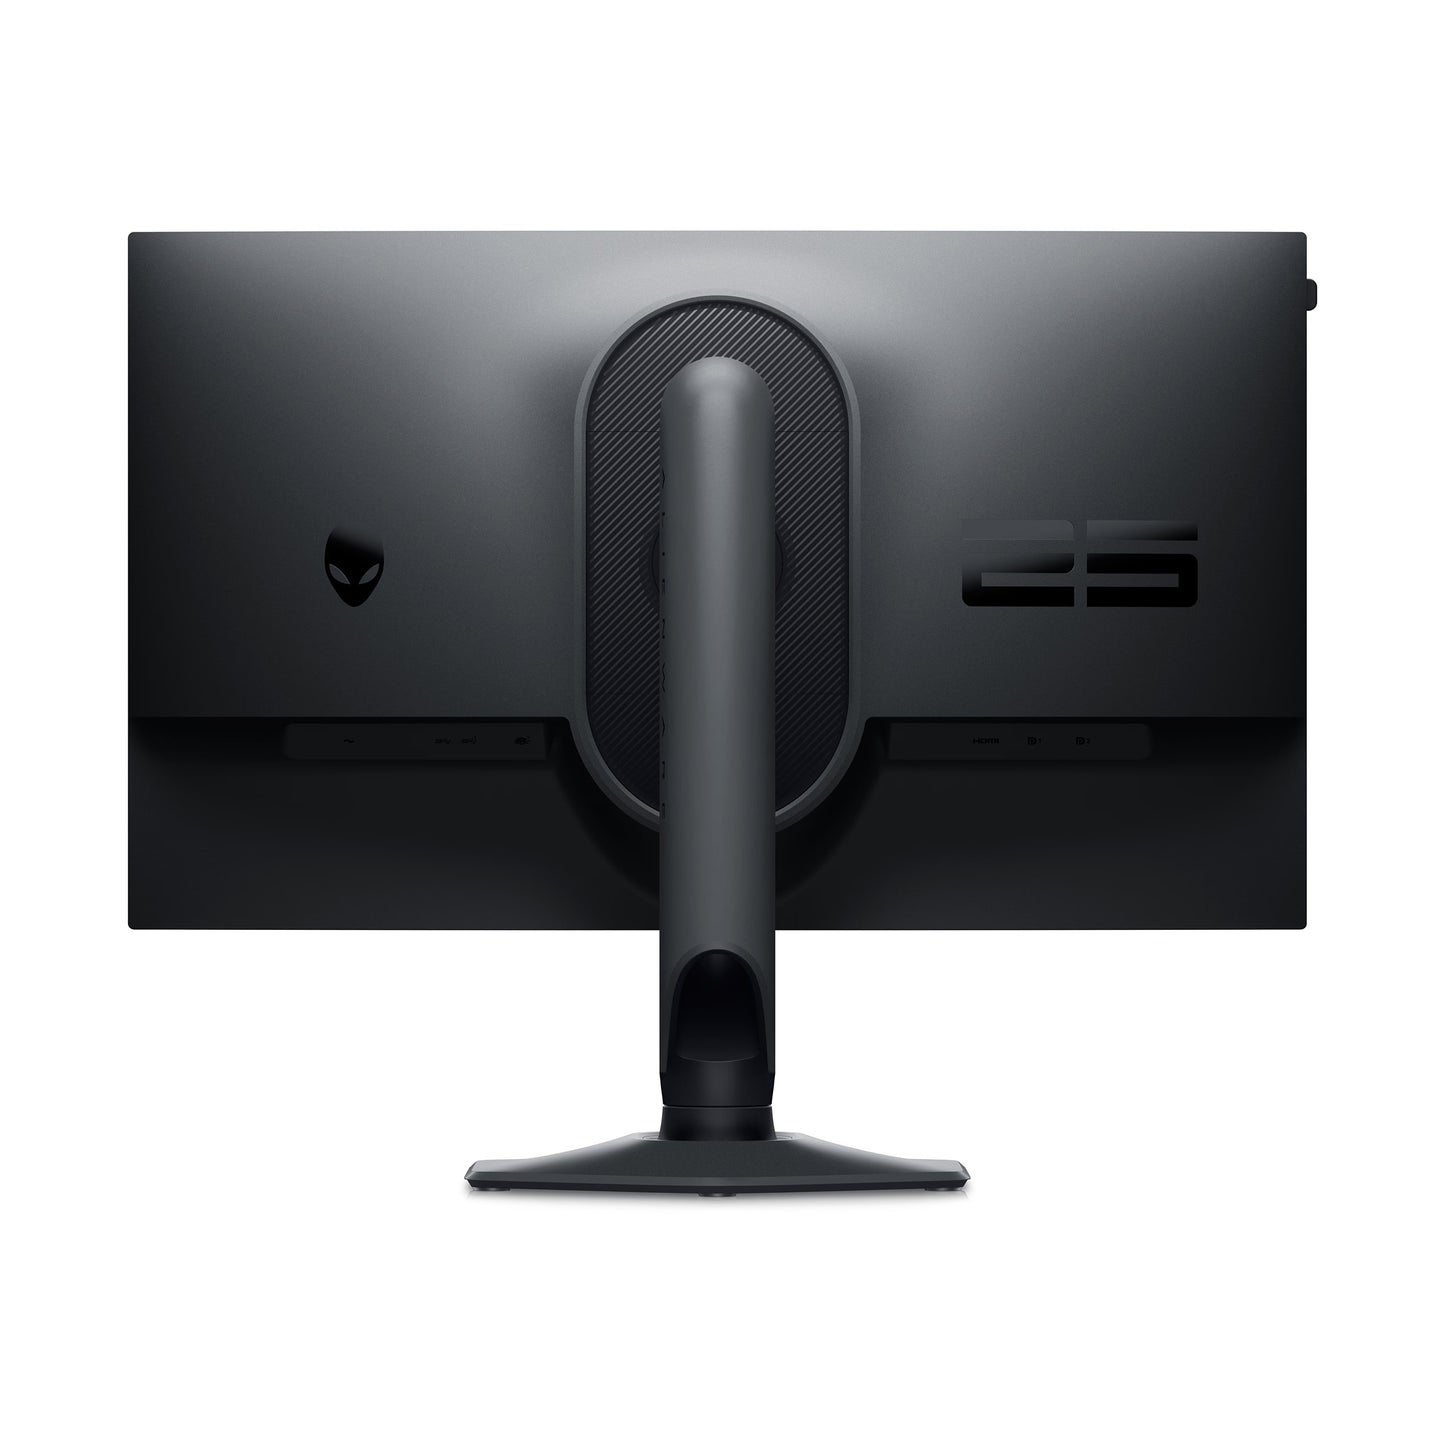 ALIENWARE 500HZ GAMING MONITOR - AW2524HF